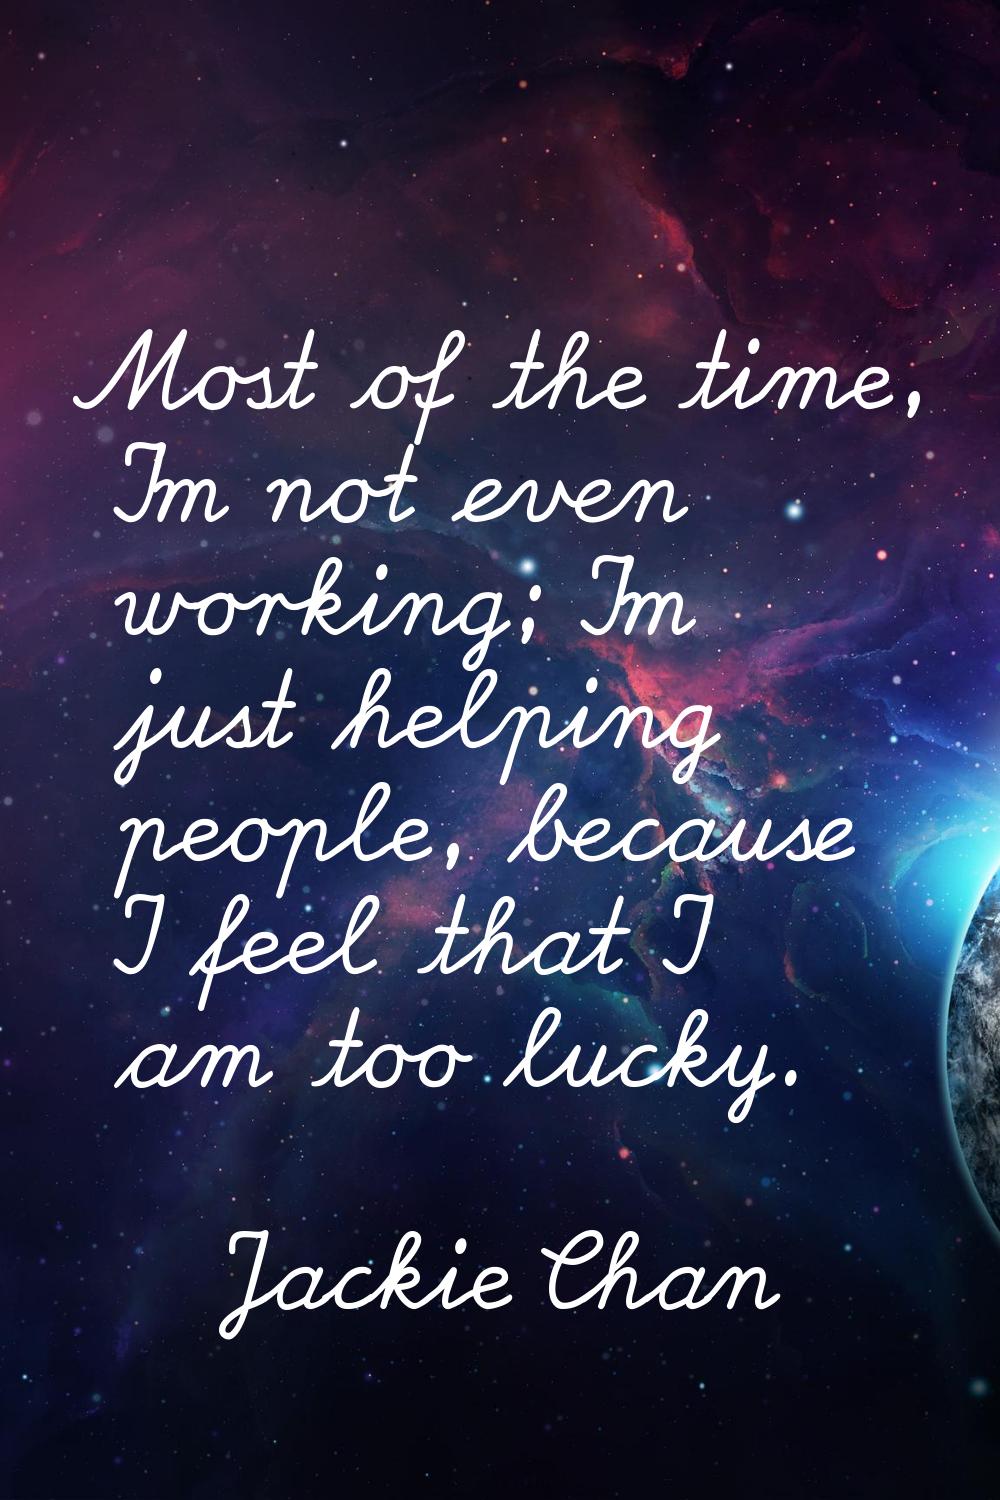 Most of the time, I'm not even working; I'm just helping people, because I feel that I am too lucky